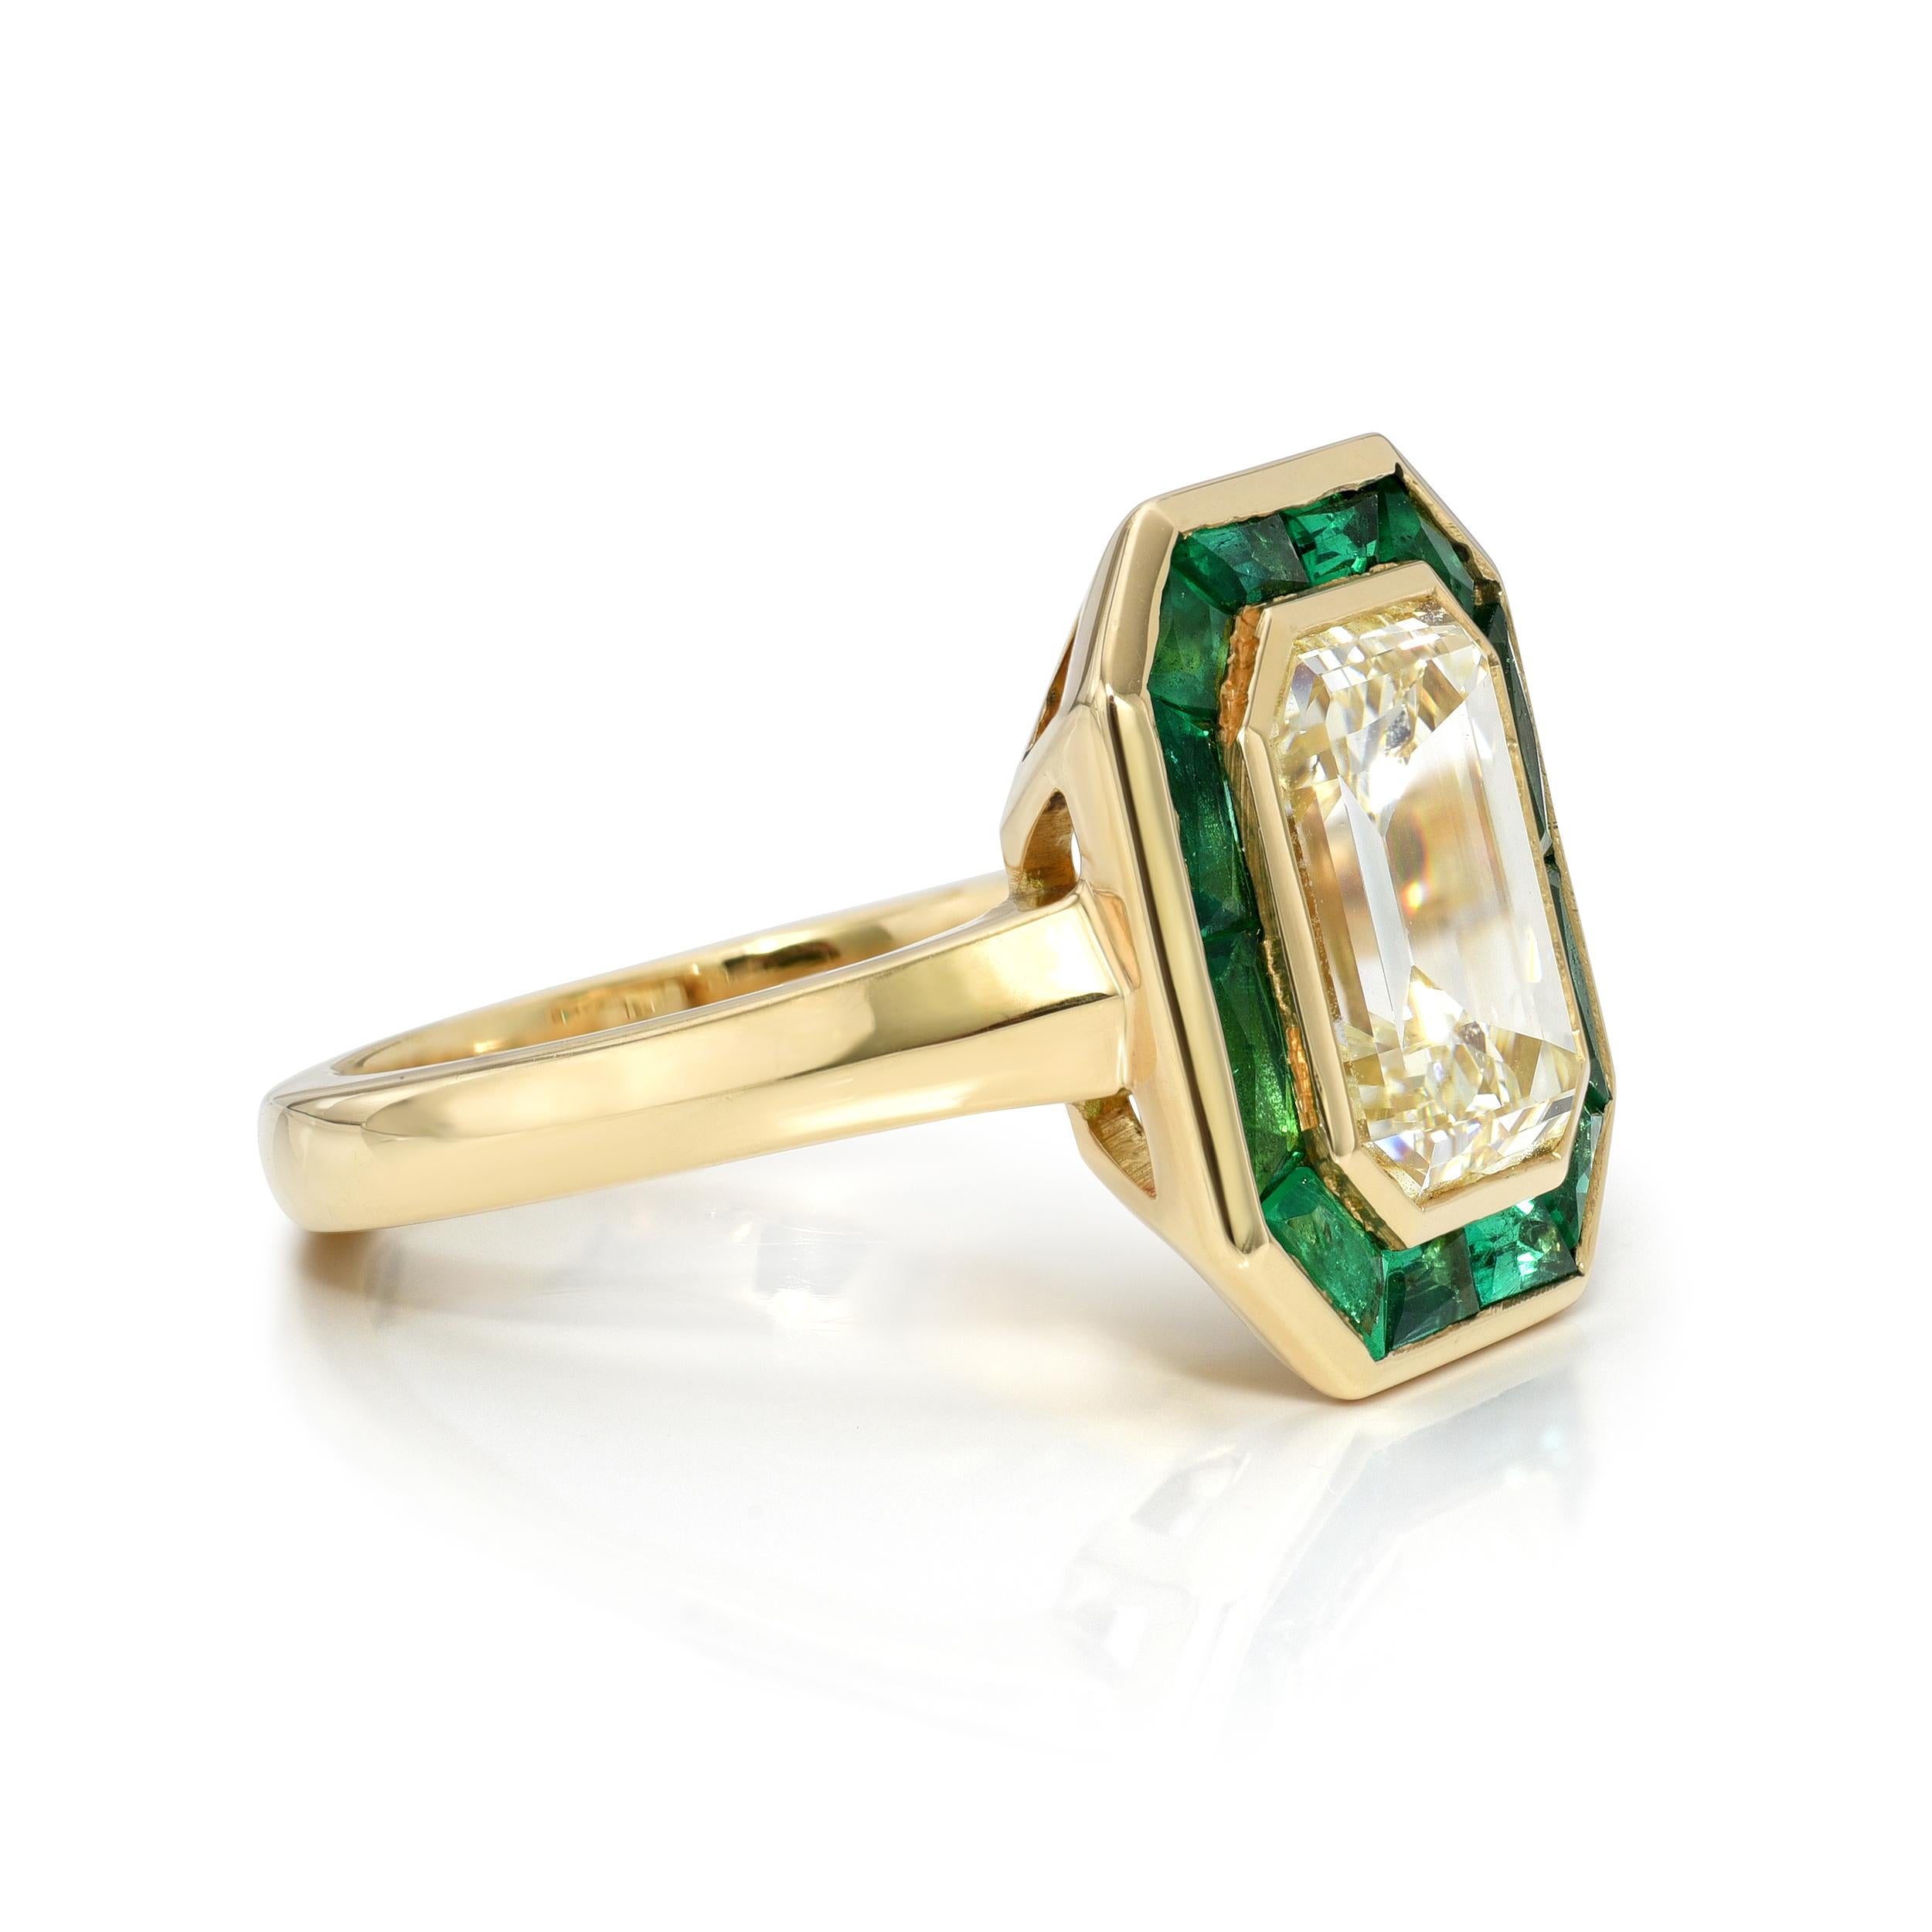 3.46ct N/VS2 GIA certified emerald cut diamond with 0.94ctw French cut green emerald baguette accent stones bezel set in a handcrafted 18K yellow gold mounting. 